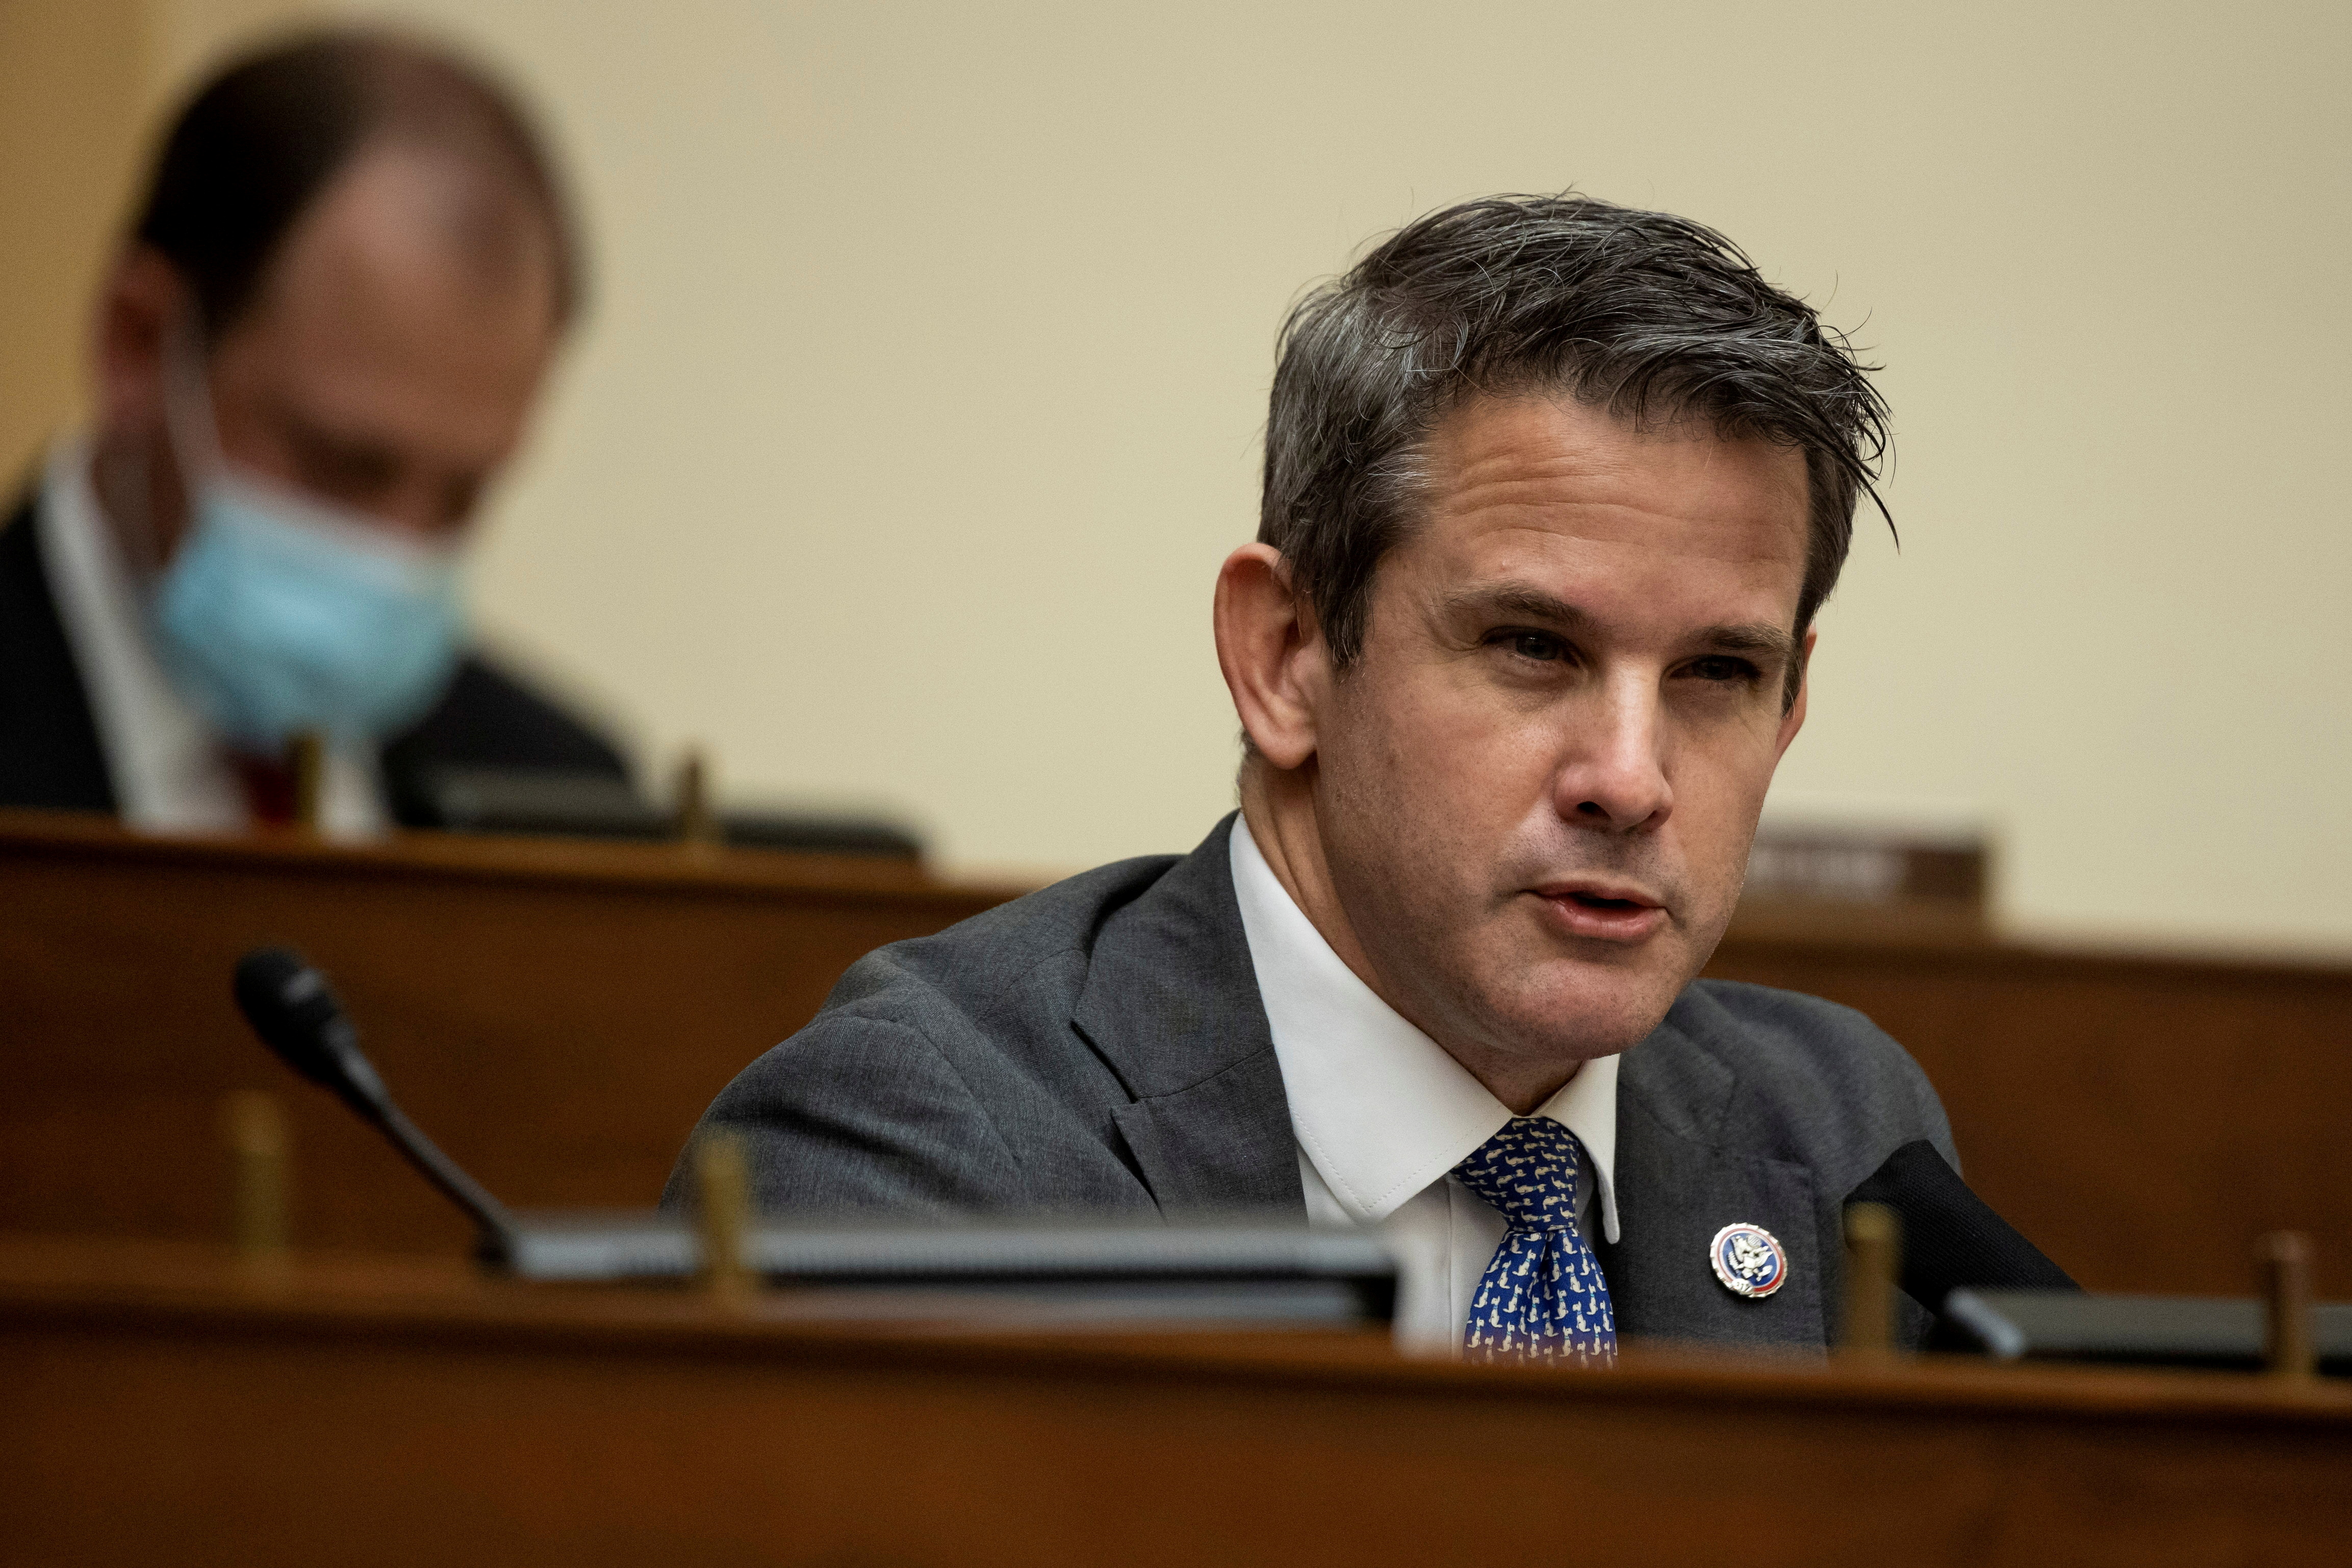 Representative Adam Kinzinger (R-IL) speaks during a House Foreign Affairs Committee hearing in Washington, D.C., U.S., March 10, 2021. Ting Shen/Pool via REUTERS